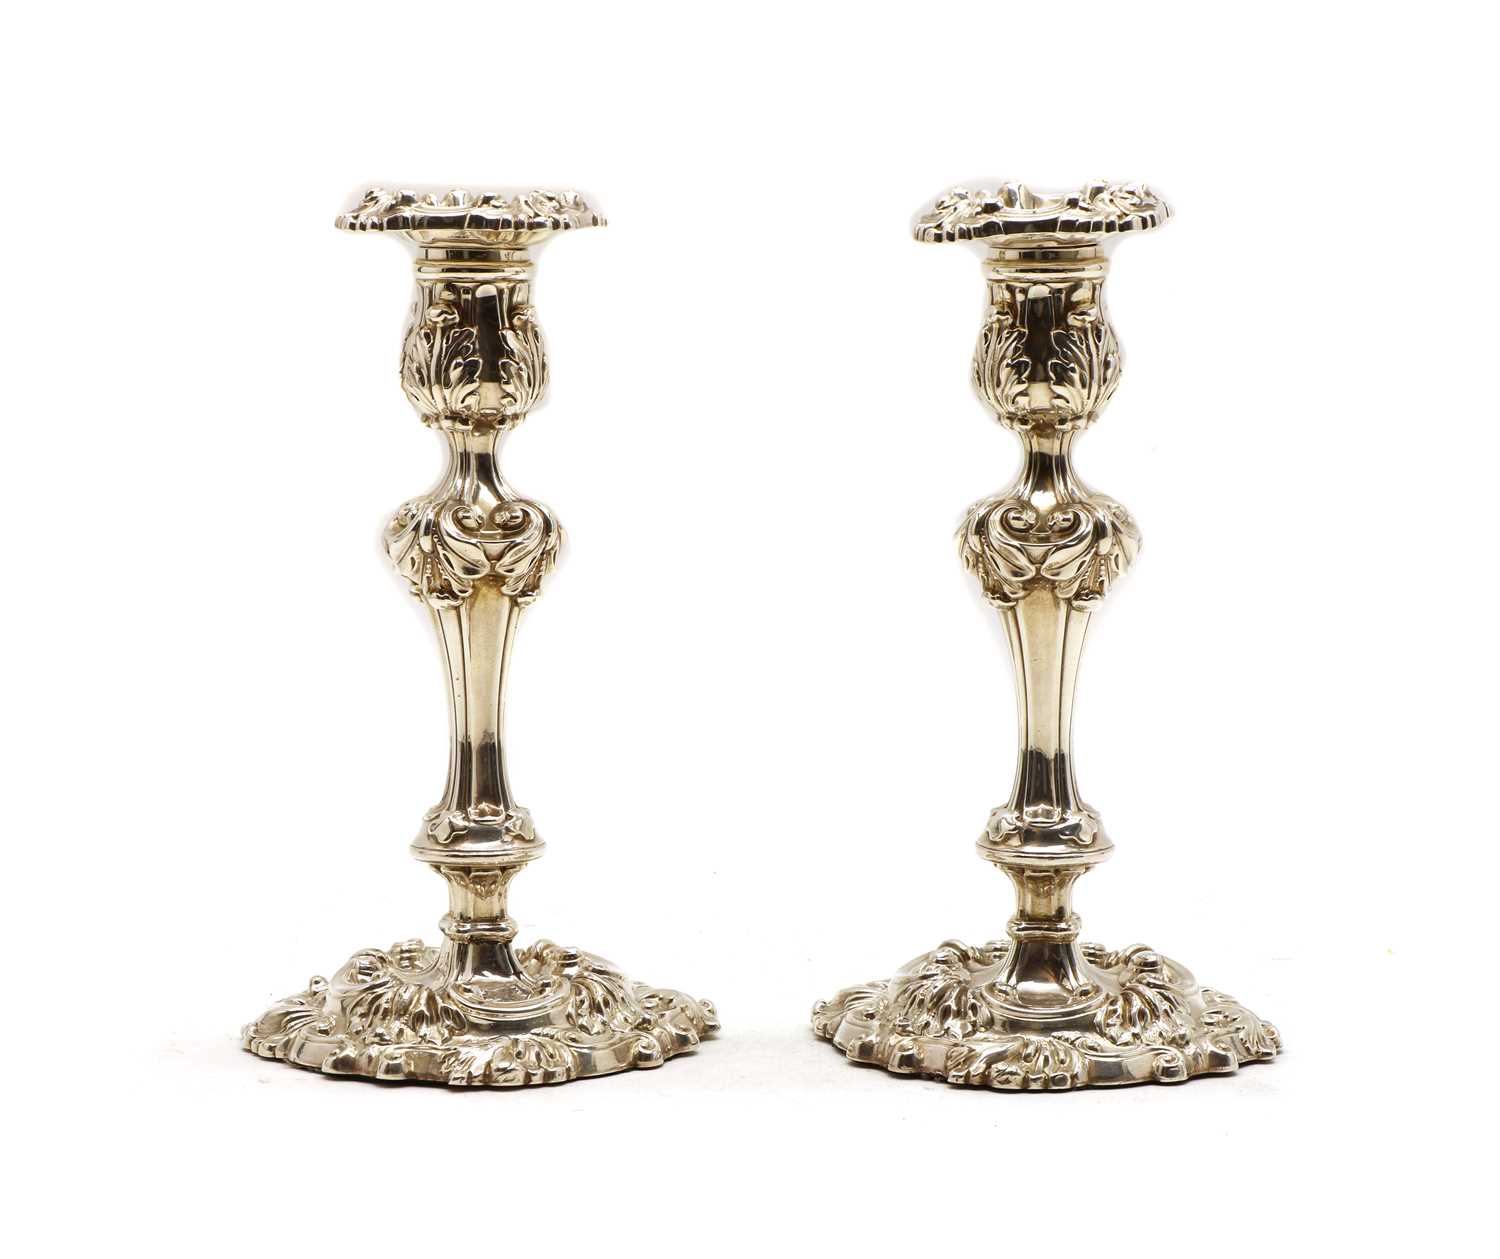 Lot 30 - A pair of George III silver candlesticks